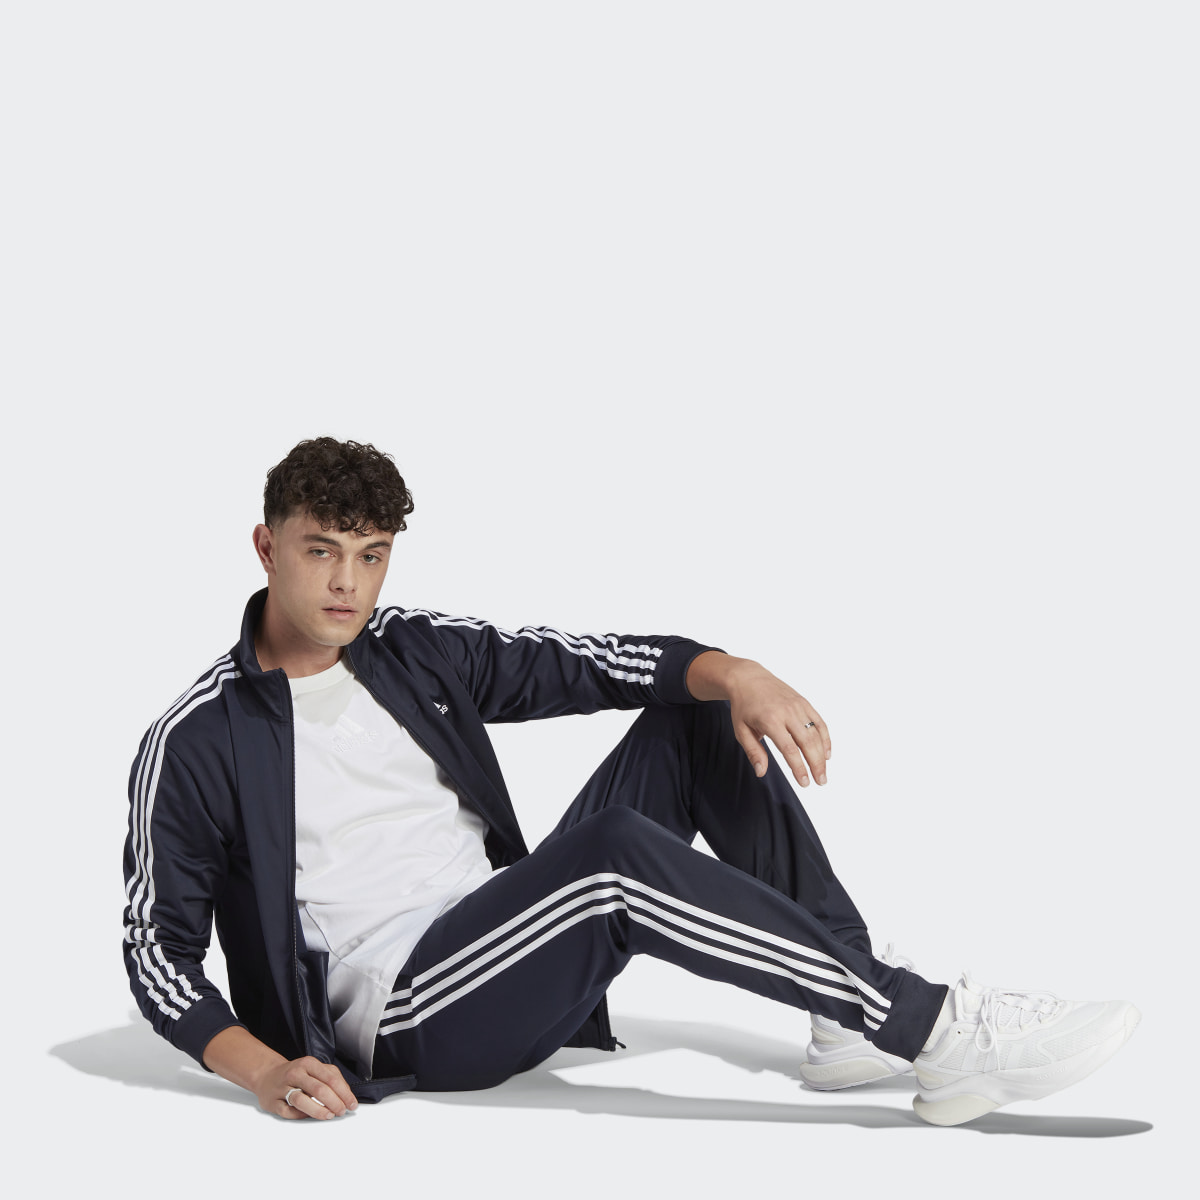 Adidas Basic 3-Stripes Tricot Track Suit. 4